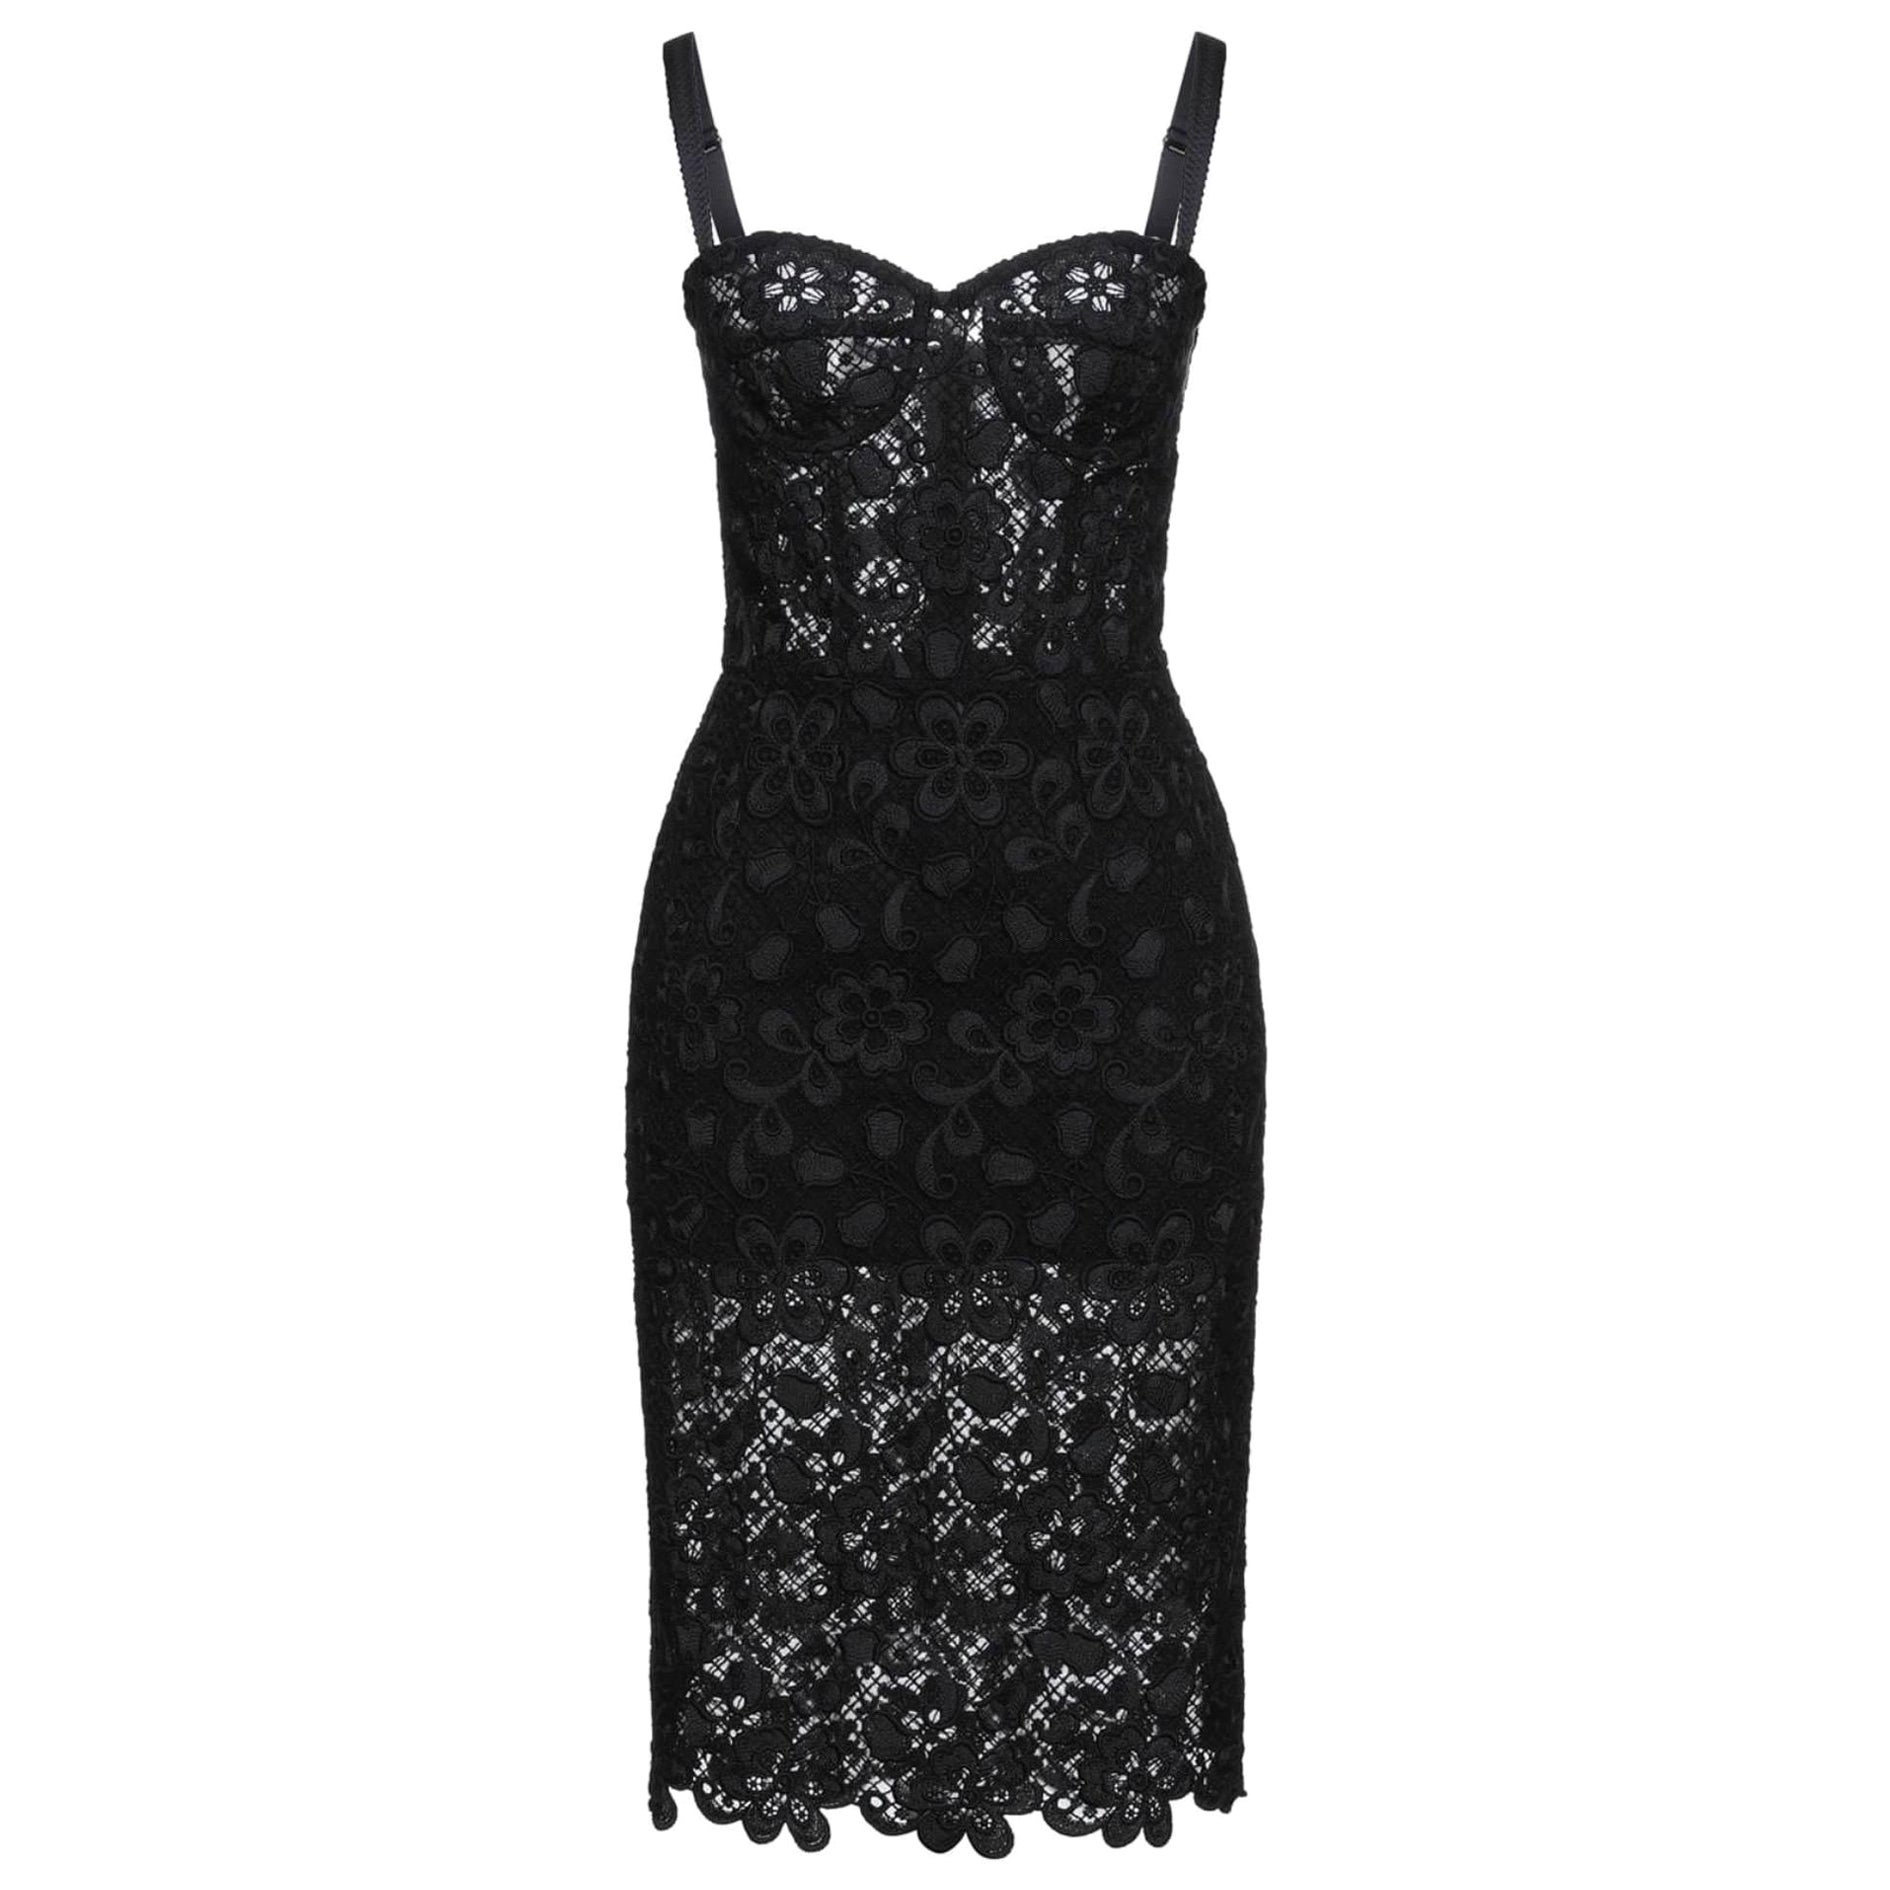 Dolce & Gabbana sleeveless sheath dress is
overlaid in delicate floral lace